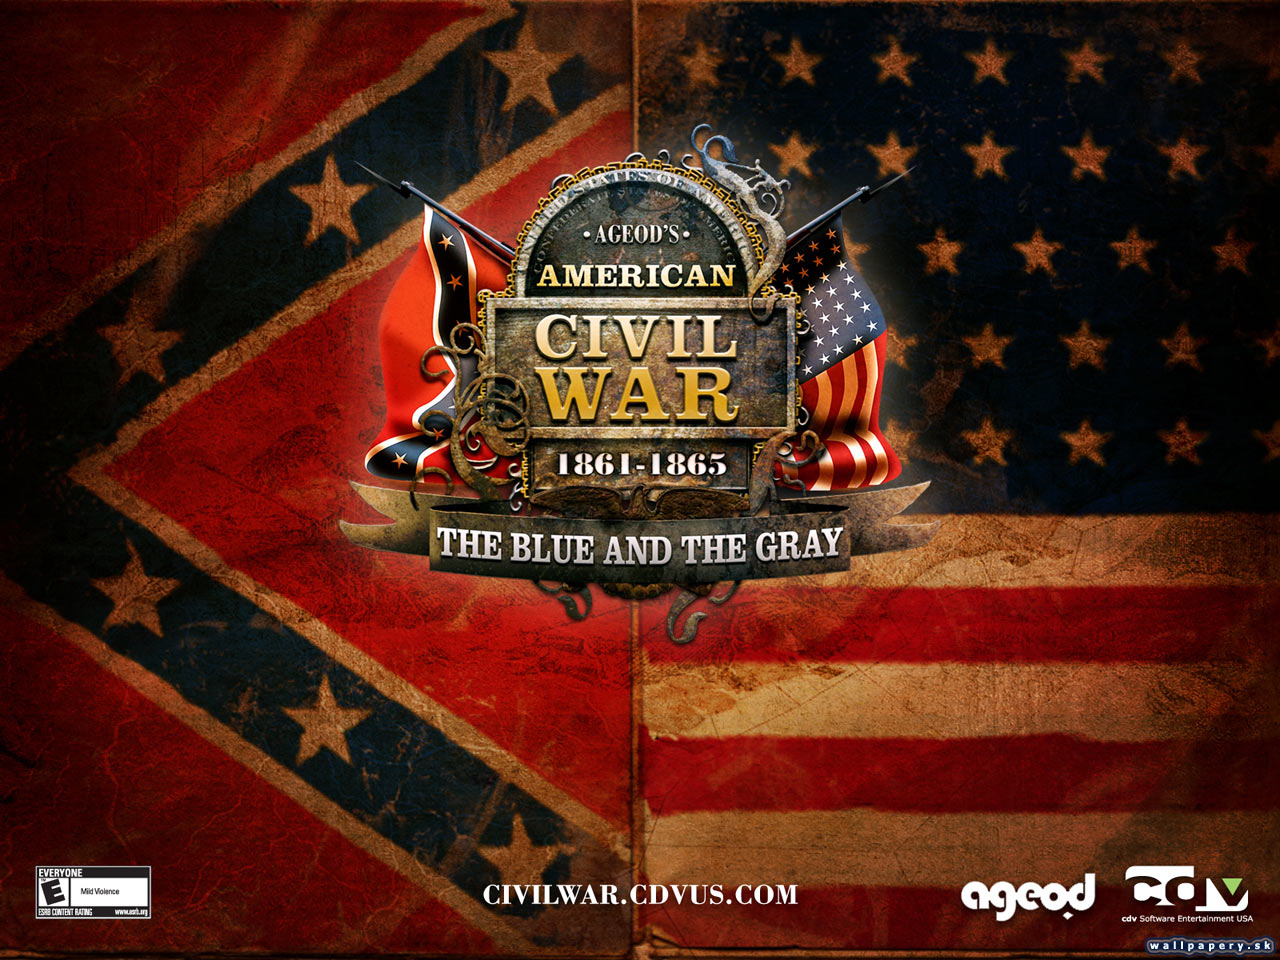 Ageod's American Civil War - The Blue and the Gray - wallpaper 8